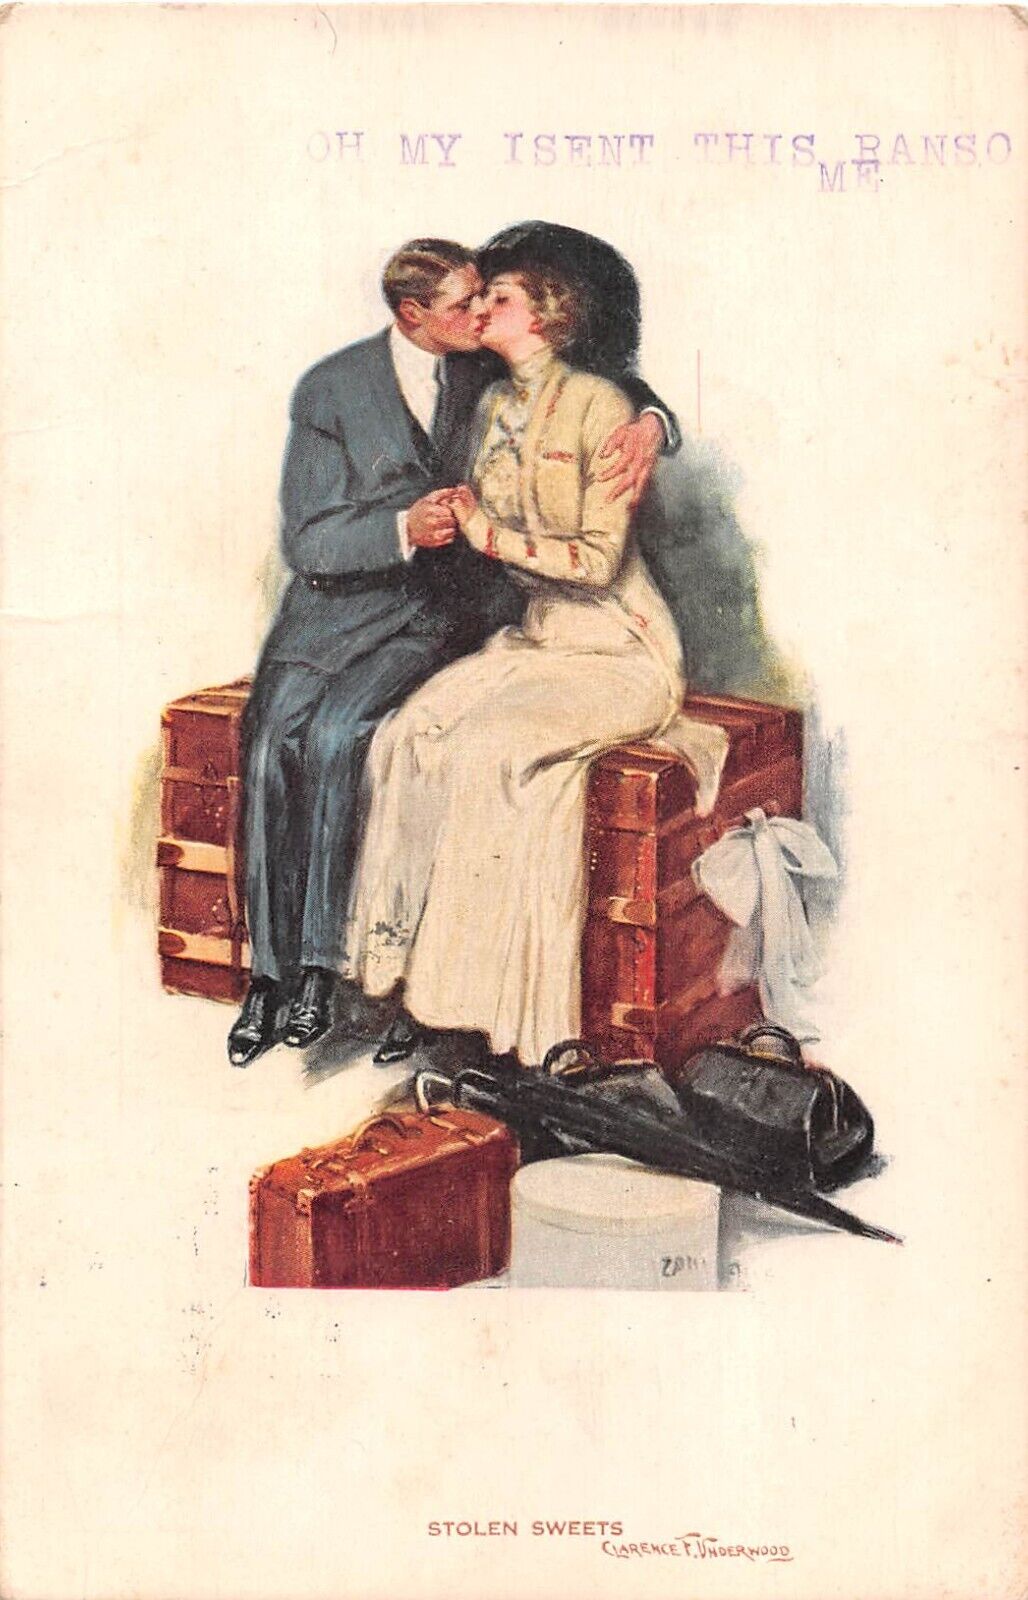 Lovers Kissing on a Trunk-Stolen Sweets-1914 Postcard by Clarence Underwood